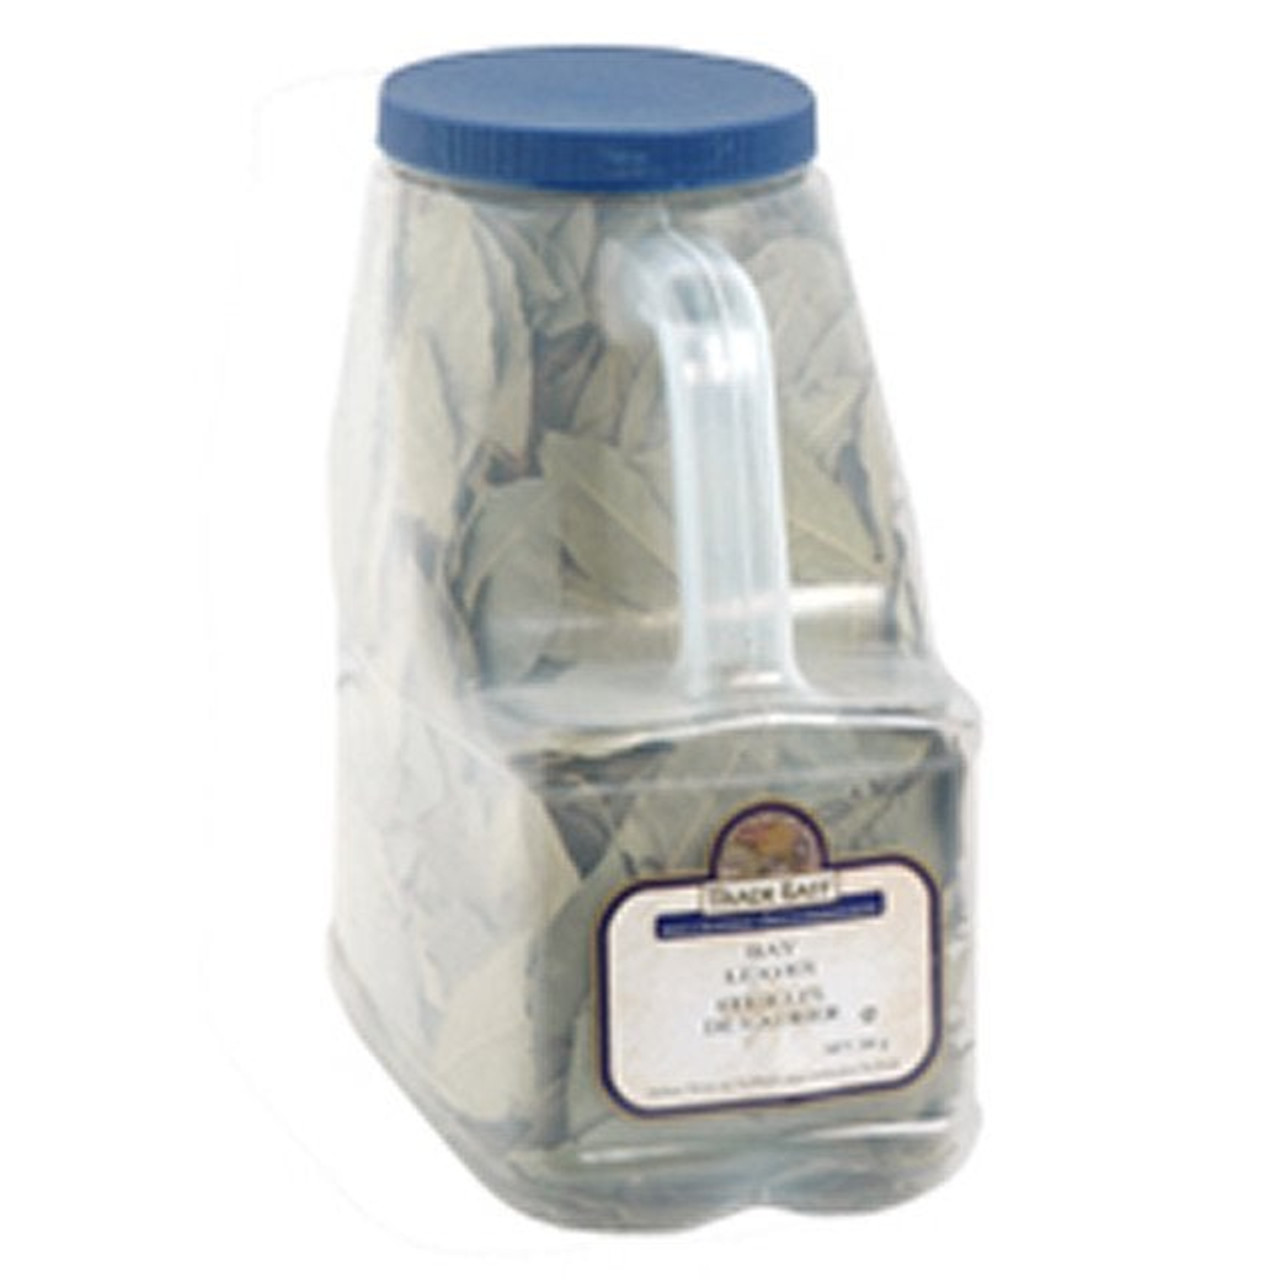 Trade East Whole Bay Leaves, Spice | 284G/Unit, 1 Unit/Case